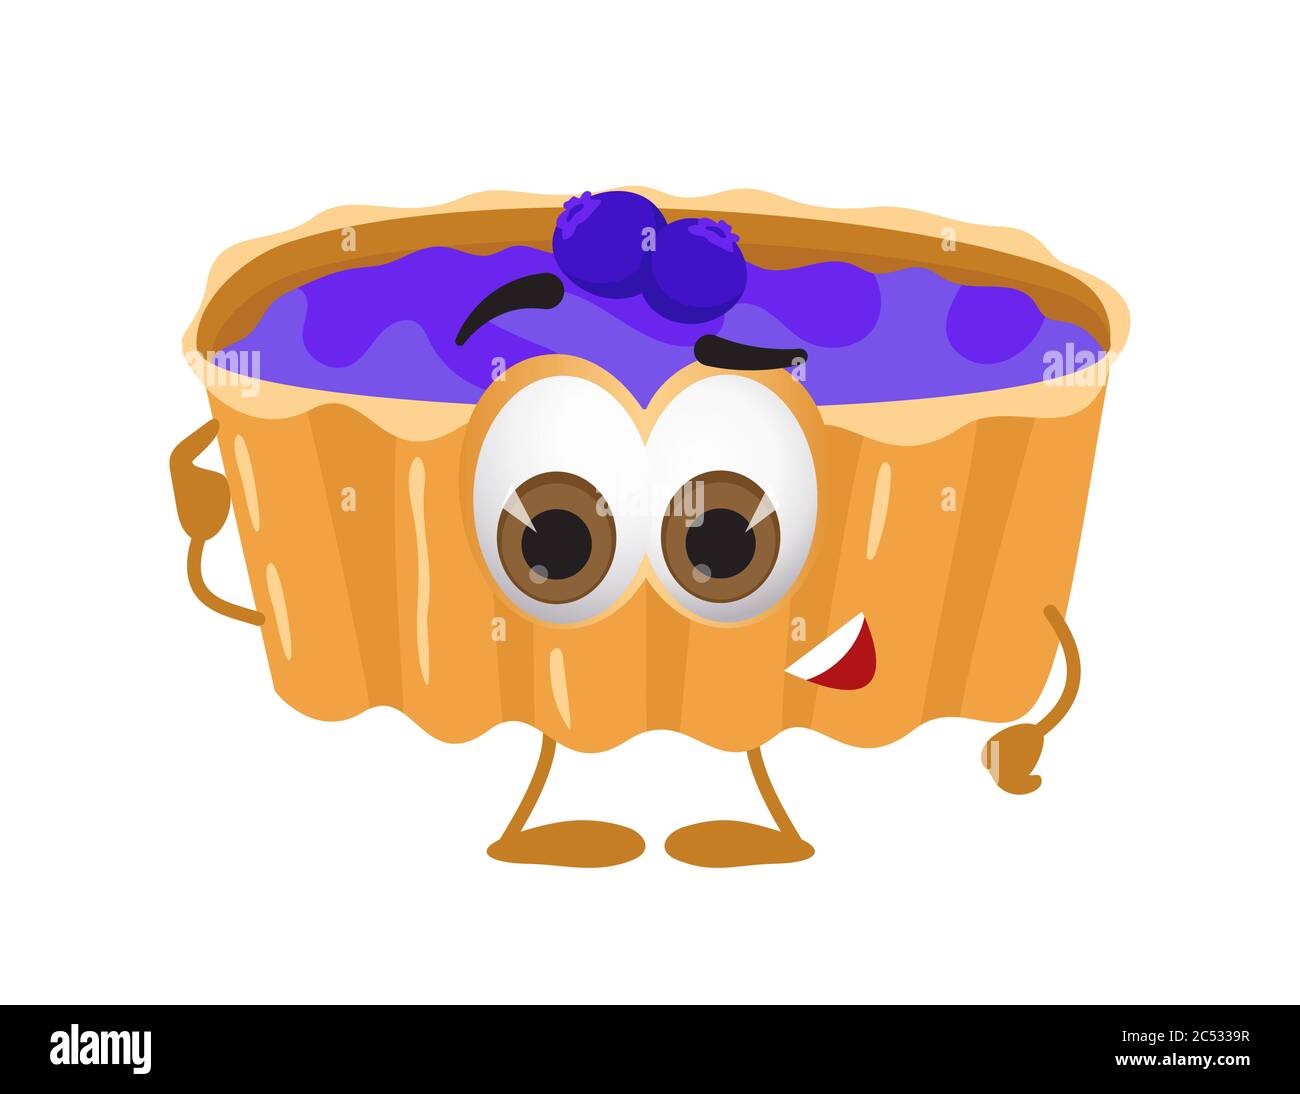 Funny Cake with eyes on white background, funny products series, flat vector illustration Stock Vector